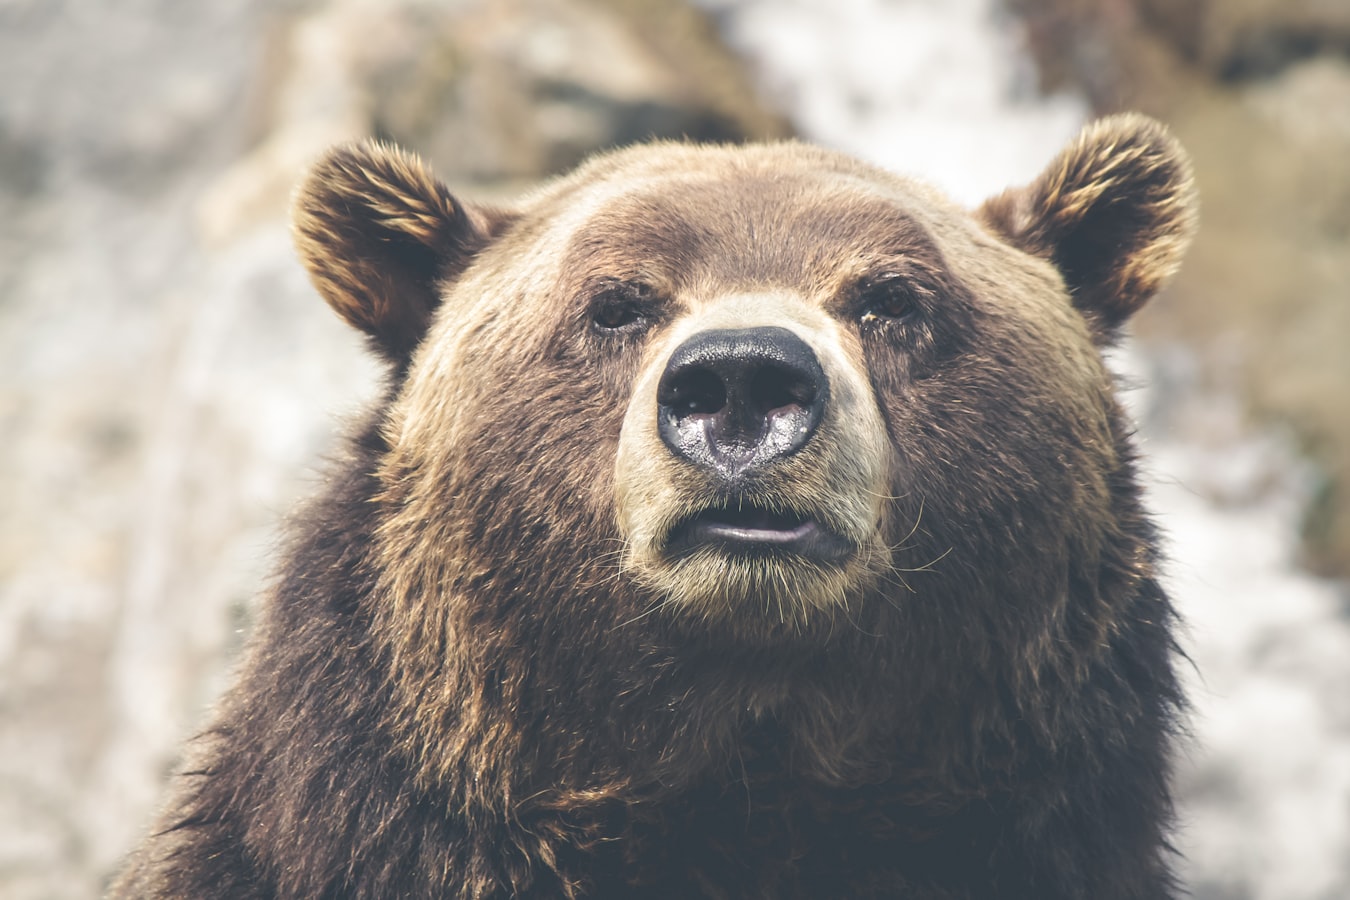 Grizzly Bears: The Fierce Predator of the North